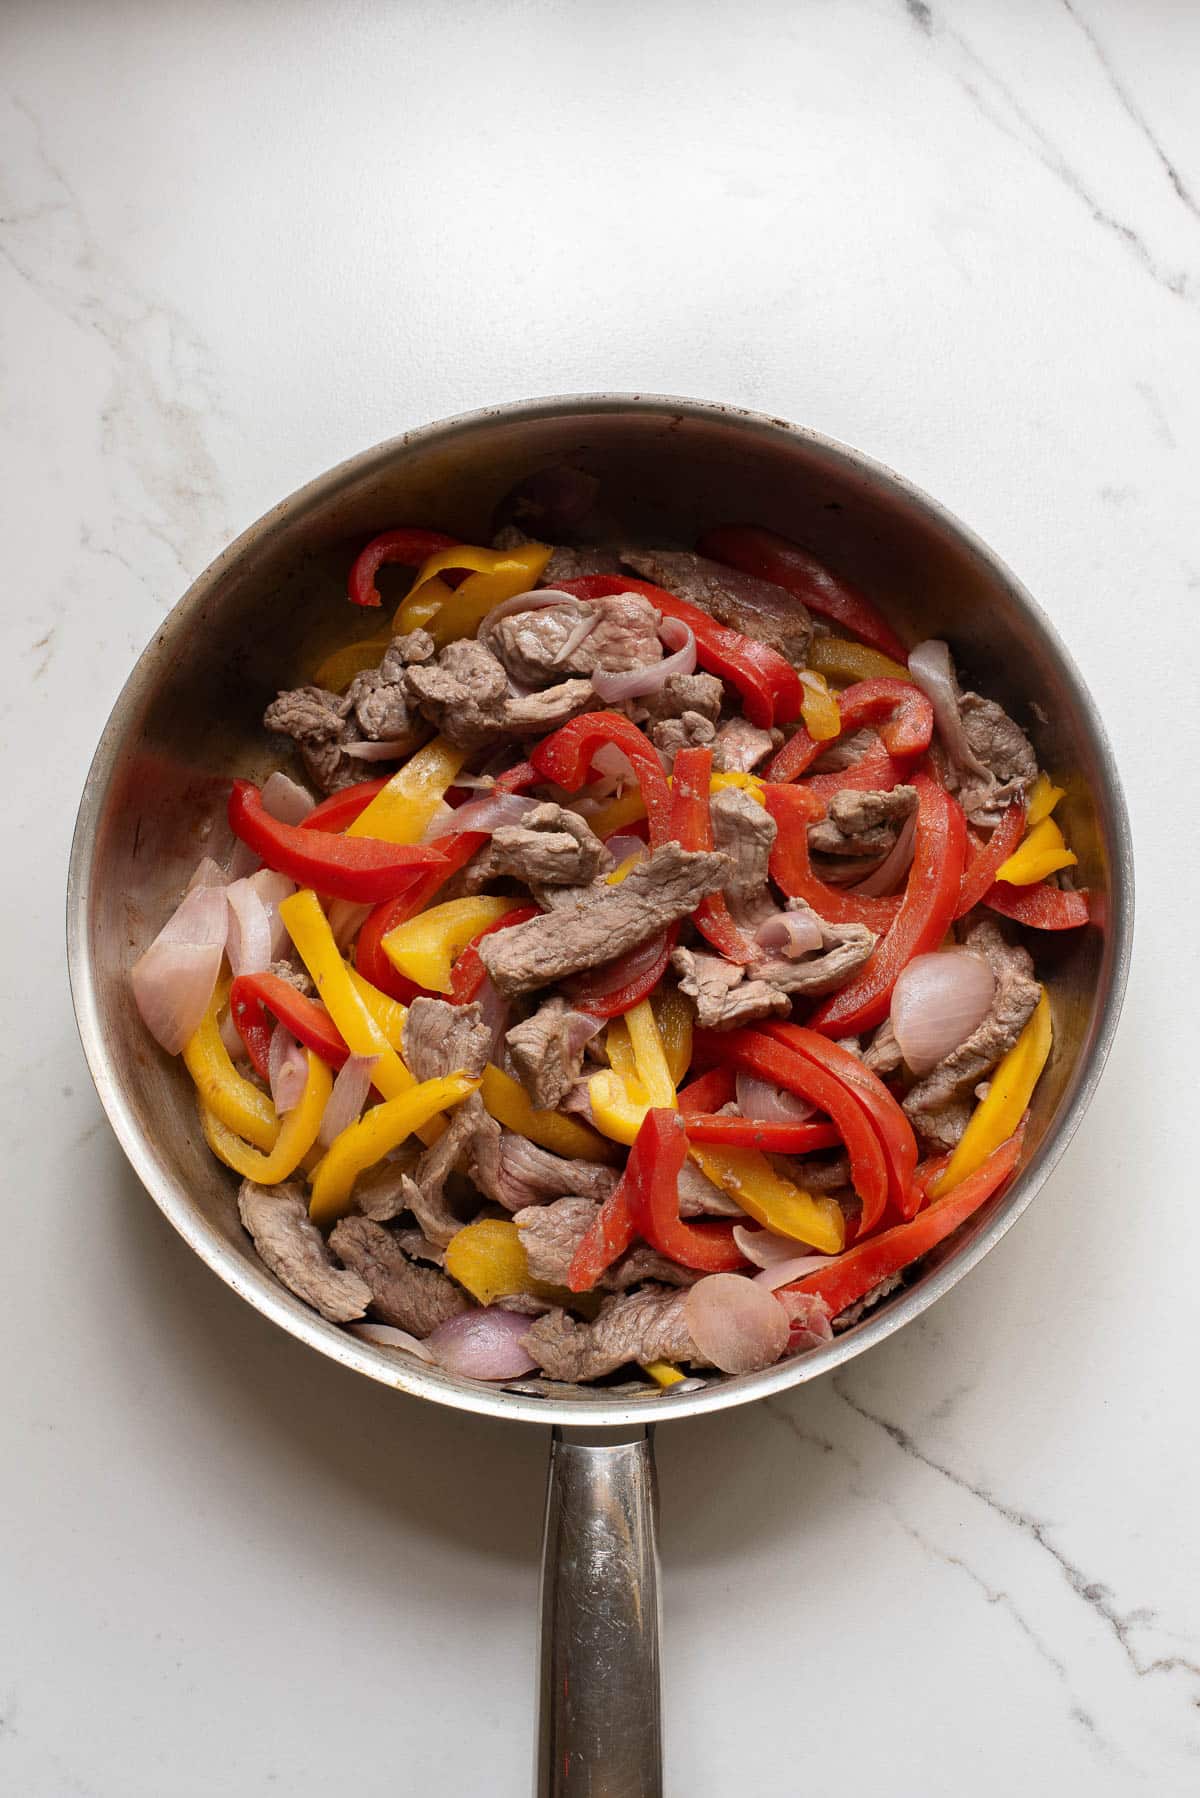 Sliced steak and pepper and onions in a stainless pan.